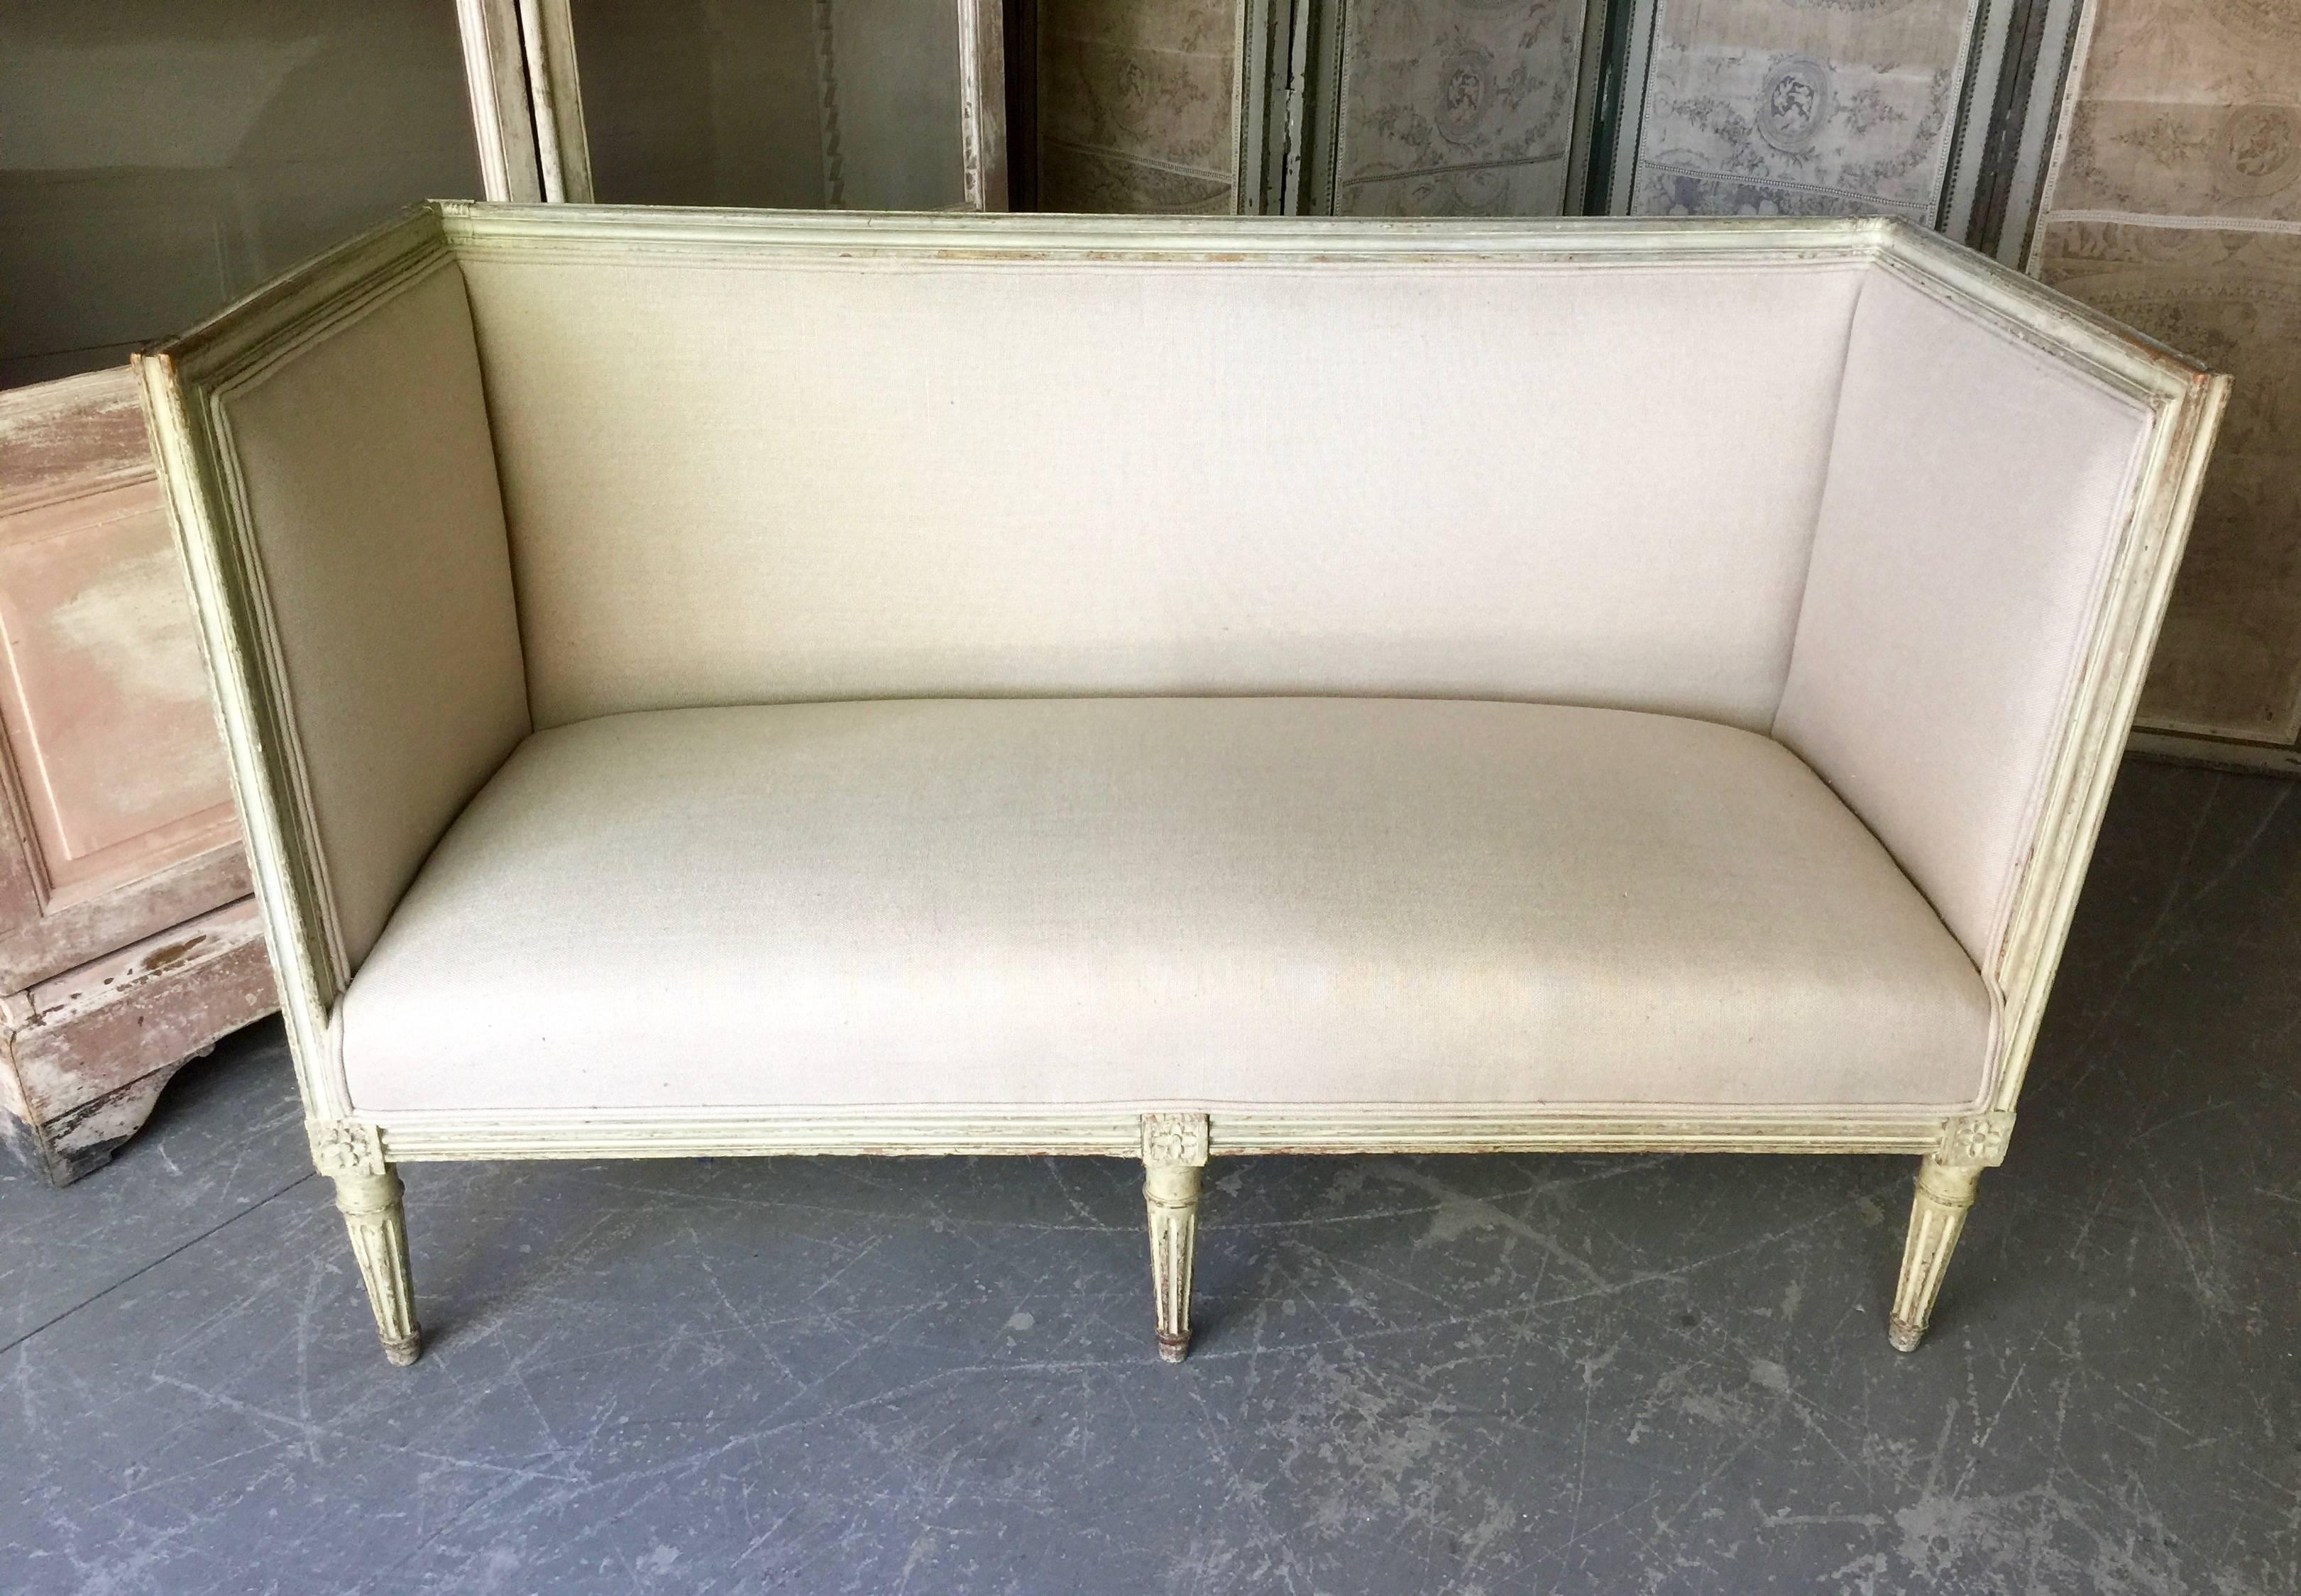 19th century French Louis XVI style painted settee in rectangular form. 
The wood frames are in lovely cream/greenish painted finish with richly carved frame, fluted leg and cubic blocks decorated with florets. Completely re-upholstered in